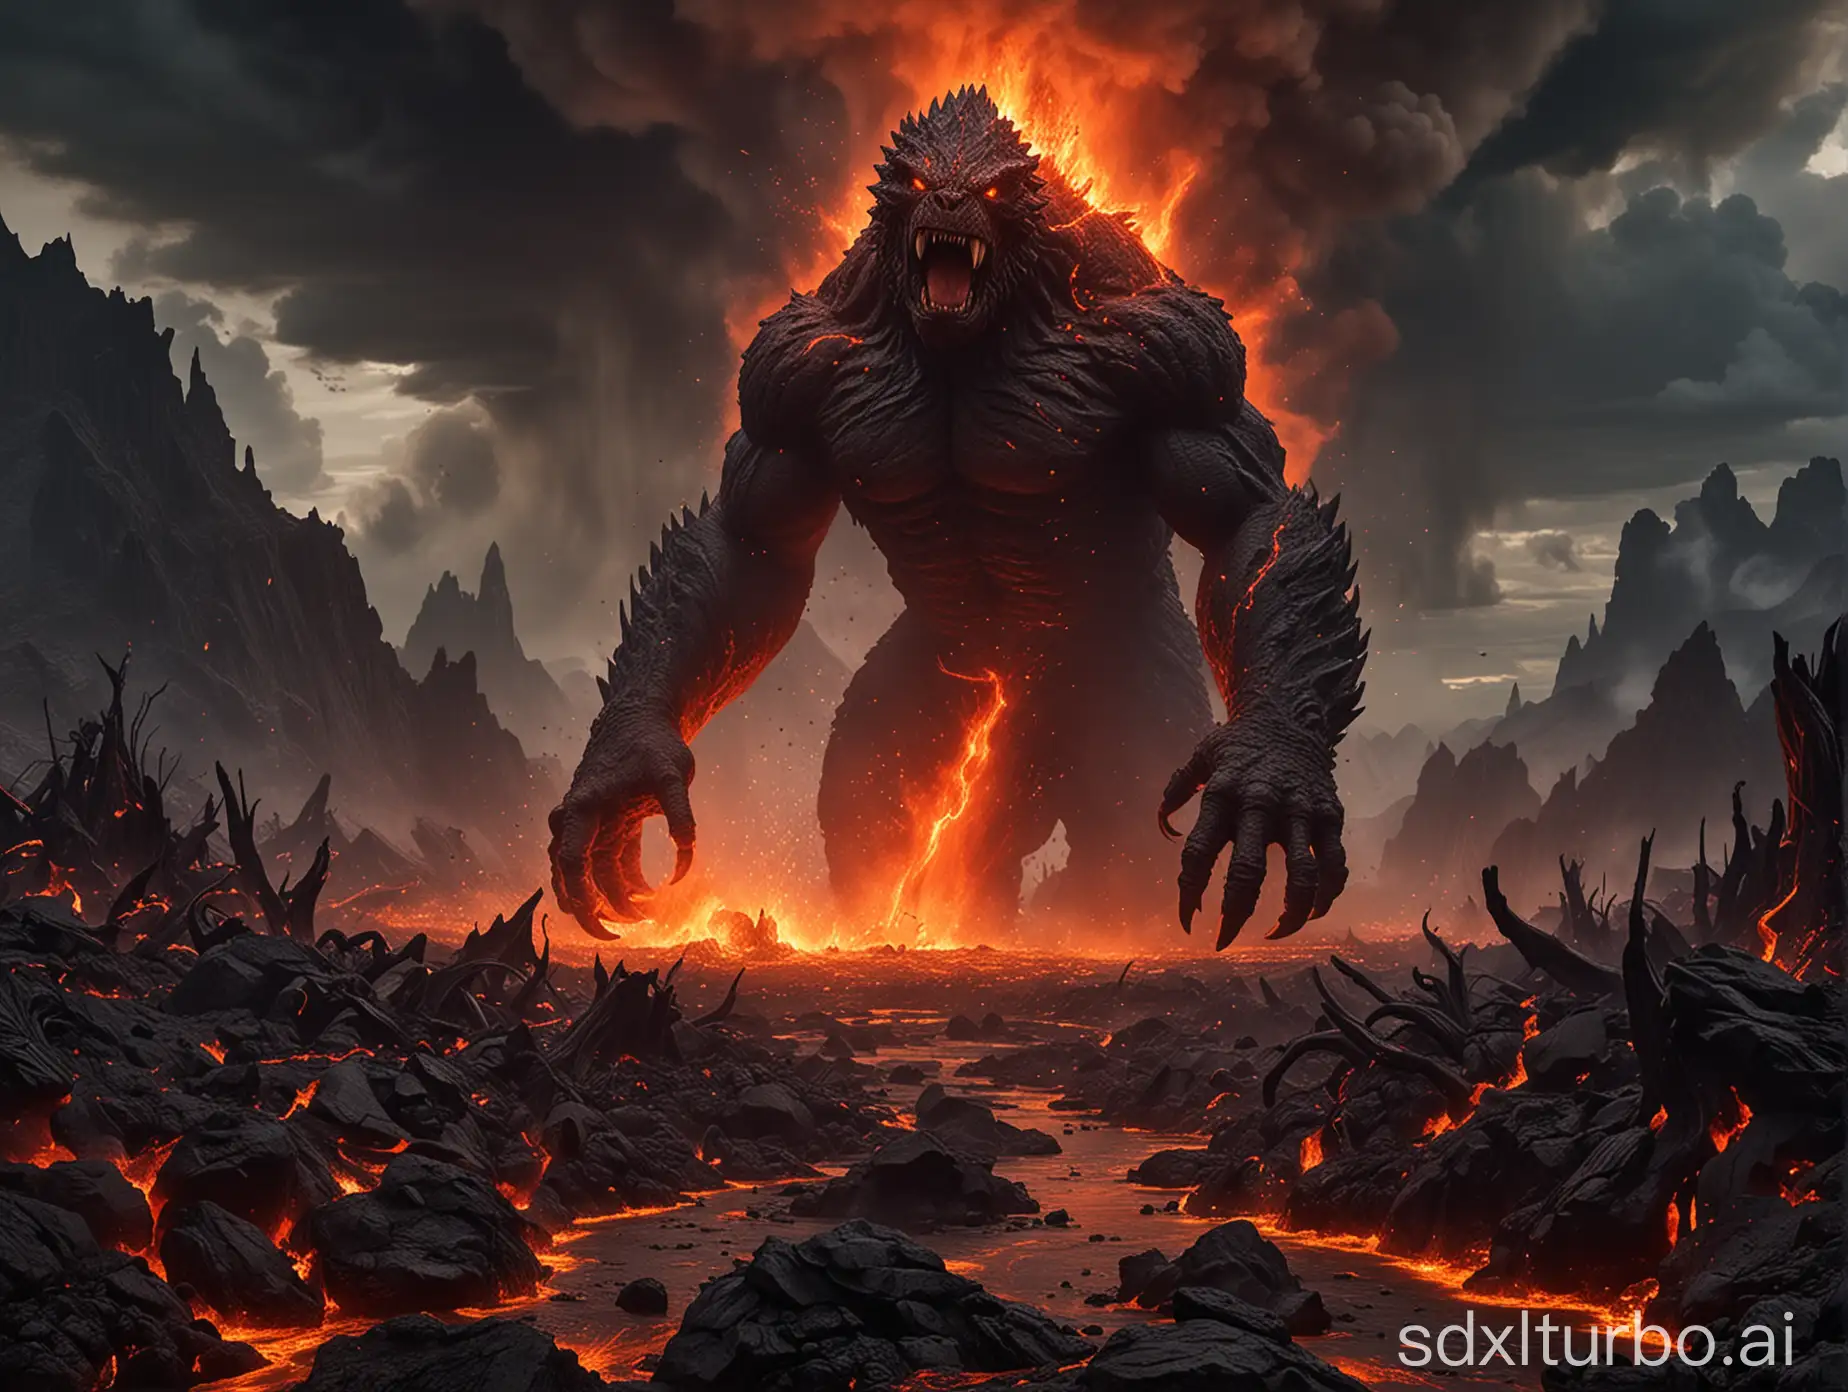 Please create an awe-inspiring work of imaginative art depicting the following scene:

Birth of a lava monster: After a violent volcanic eruption, a huge lava monster emerges from the depths of the earth. Its body is made of hot magma, with flowing red-hot magma on the surface, emitting rolling heat waves.

Volcano's roar: The volcano continues to erupt violently, magma splashes, volcanic ash and toxic gases form a huge cloud tumbling in the sky, providing a dramatic background for the monster's appearance.

Monster's Features: The monster's appearance is frightening, with sharp lava claws and molten rock skin. Its eyes may be two burning flames, gazing forward, as if looking for the next target.

Environmental destruction: The appearance of the monster causes great destruction, the surrounding land is scorched by magma, trees and rocks are melted, showing its strong power and destructiveness.

Light and shadow effect: Although the scene is very dim, the light from the volcanic eruption and the magma glow on the monster's body provide lighting for the entire scene. The light and shadow on the monster create a strong visual contrast and dynamic effect.

Ecological reaction: Around the monster, there may be some wild animals that have been startled, they flee in panic, adding to the urgency of the scene.

Please make sure that this work not only captures the intimidating power of the monster and the magnificent scene of the volcanic eruption, but also conveys a strong sense of motion and tension through the clever use of color and light.